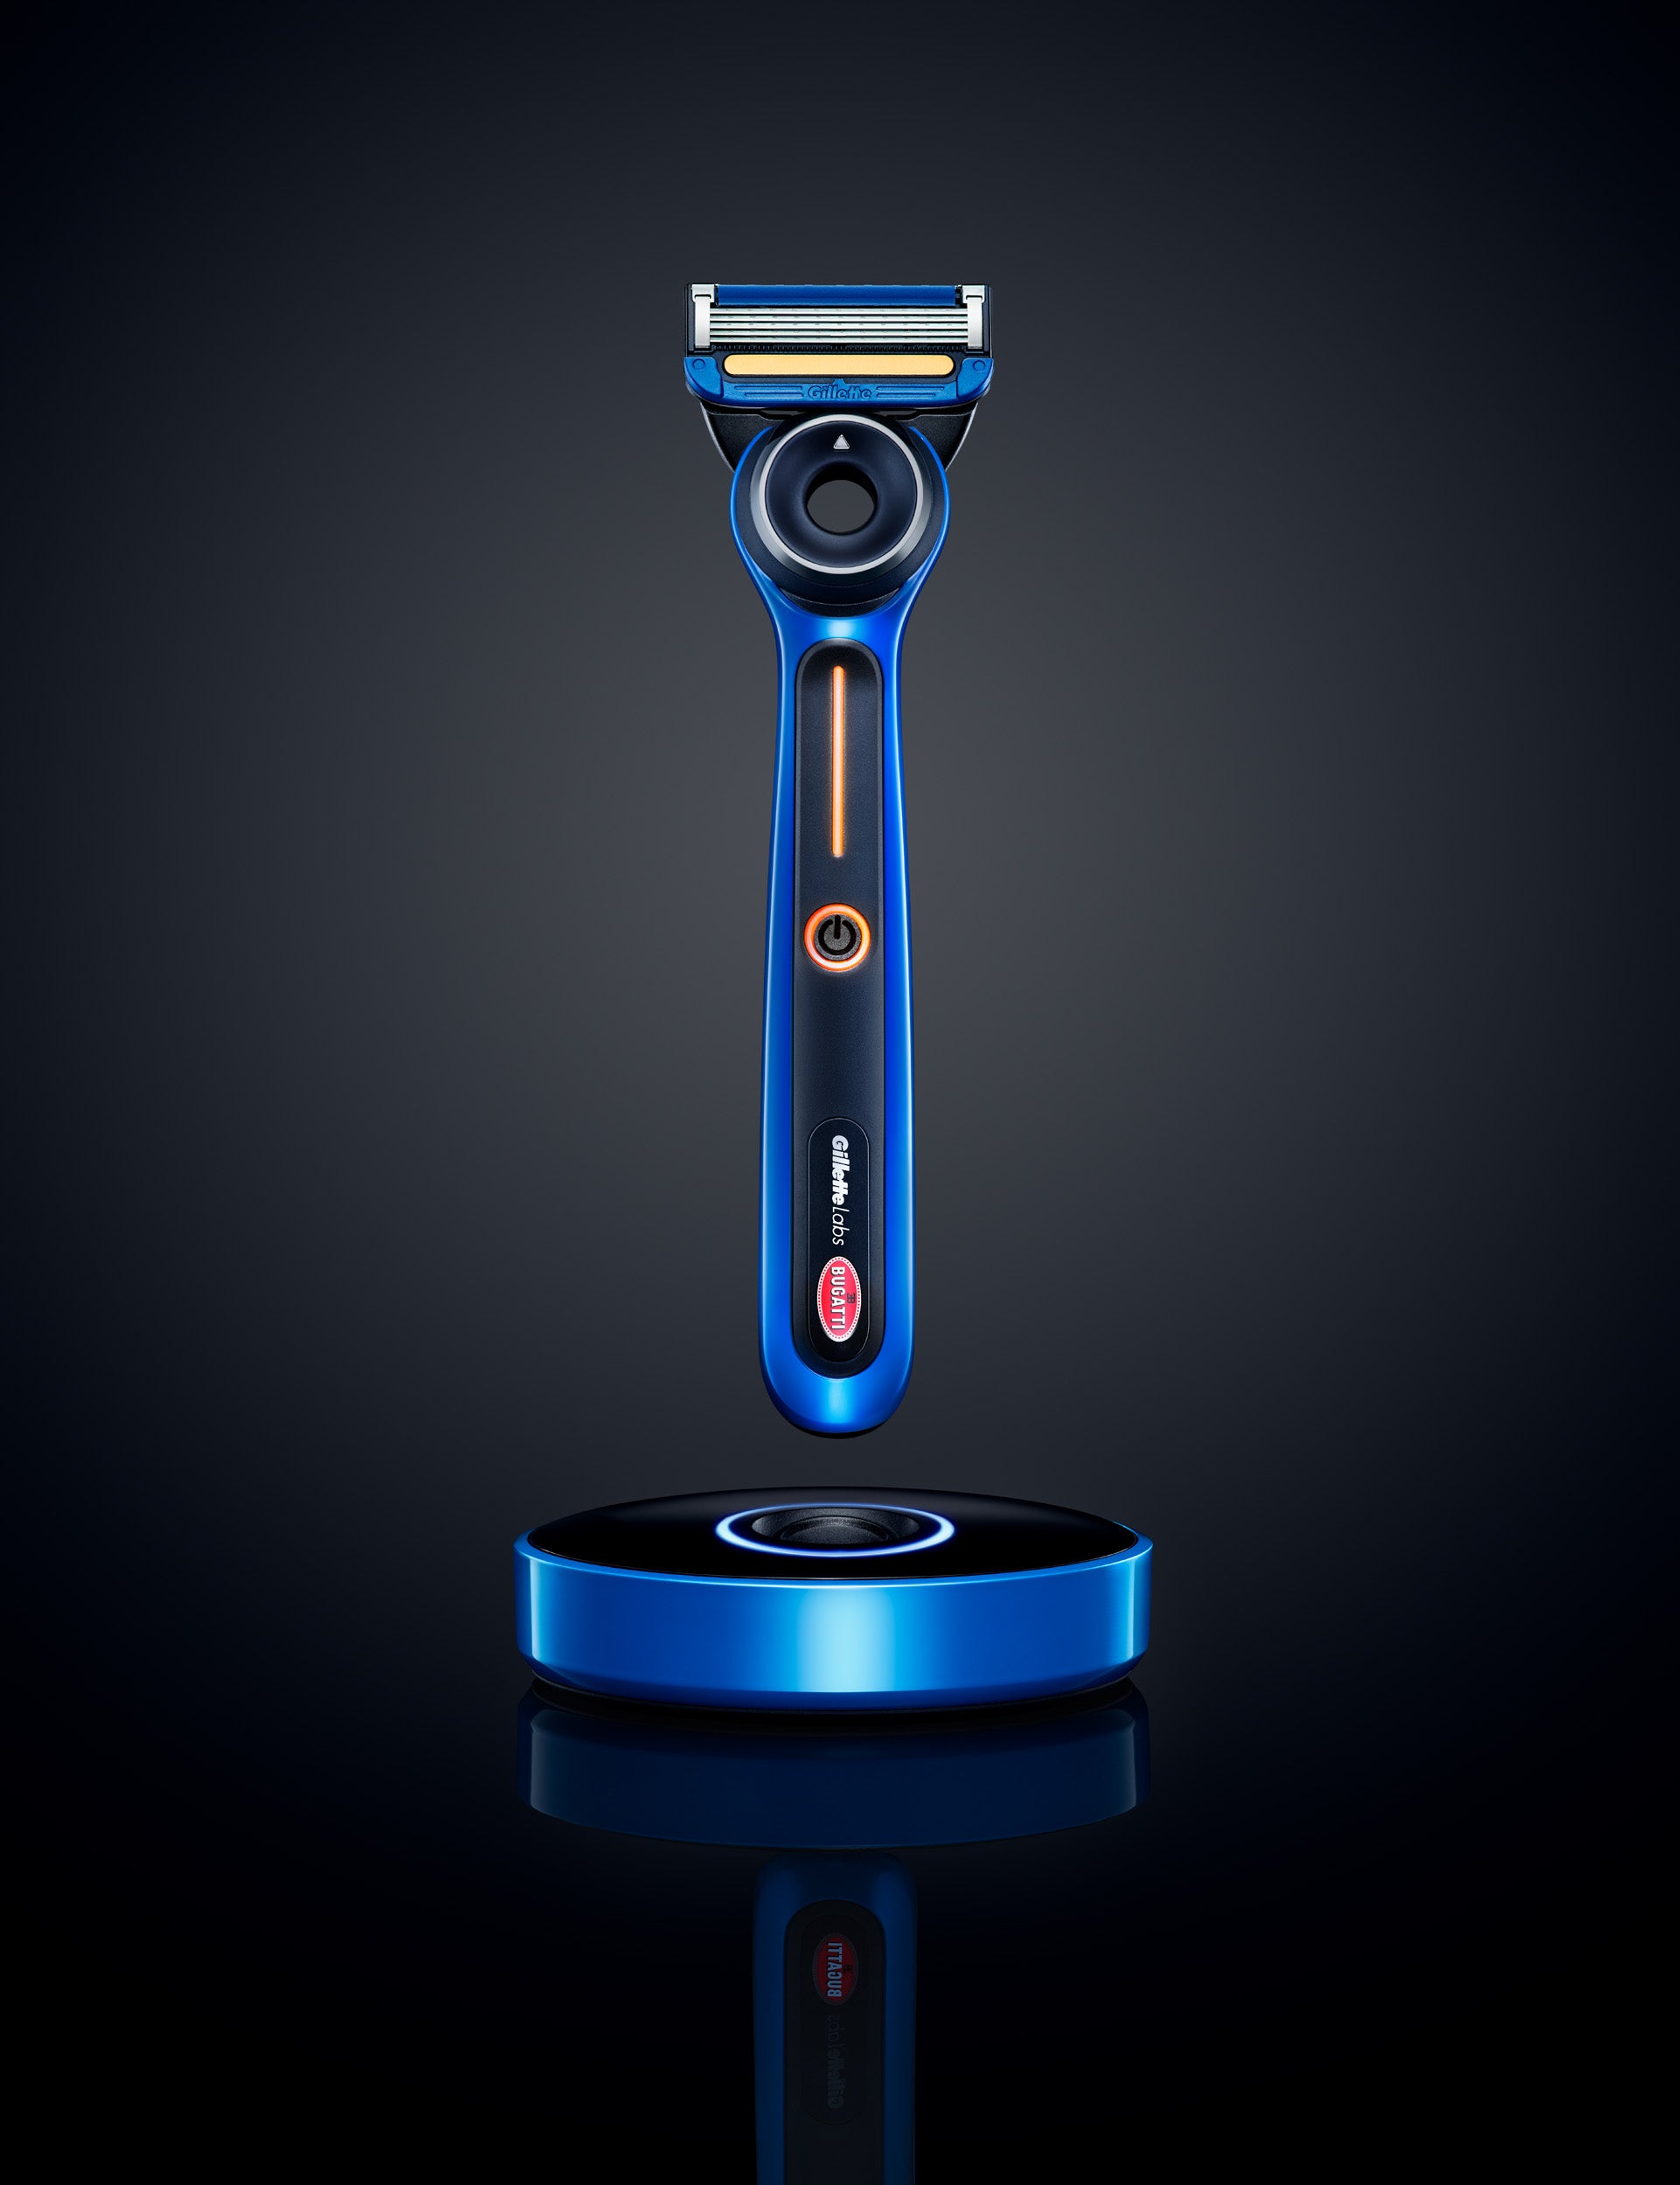 Gillette Partners With Bugatti To Create A $200 Special-Edition Heated Razor